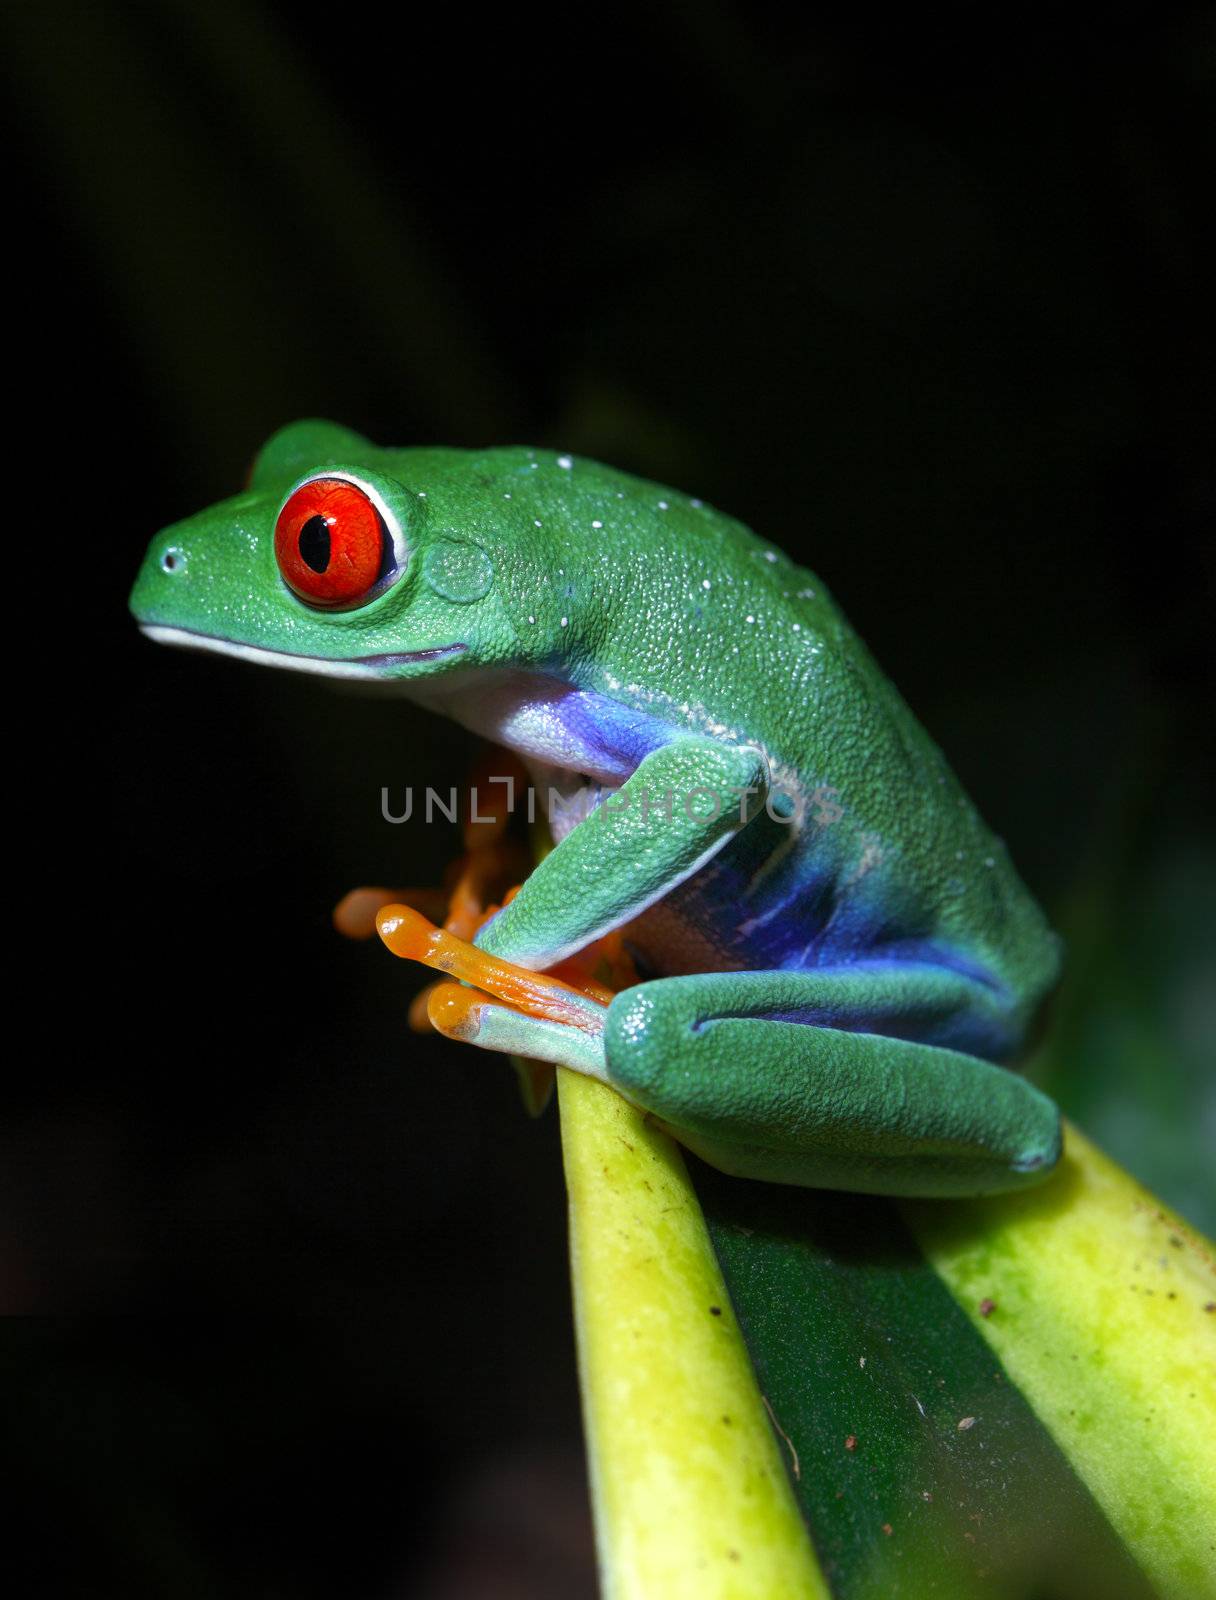 A beautifull and colorful Red-Eyed Tree Frog (Agalychnis callidryas) sitting along a tropical plant with a black background.